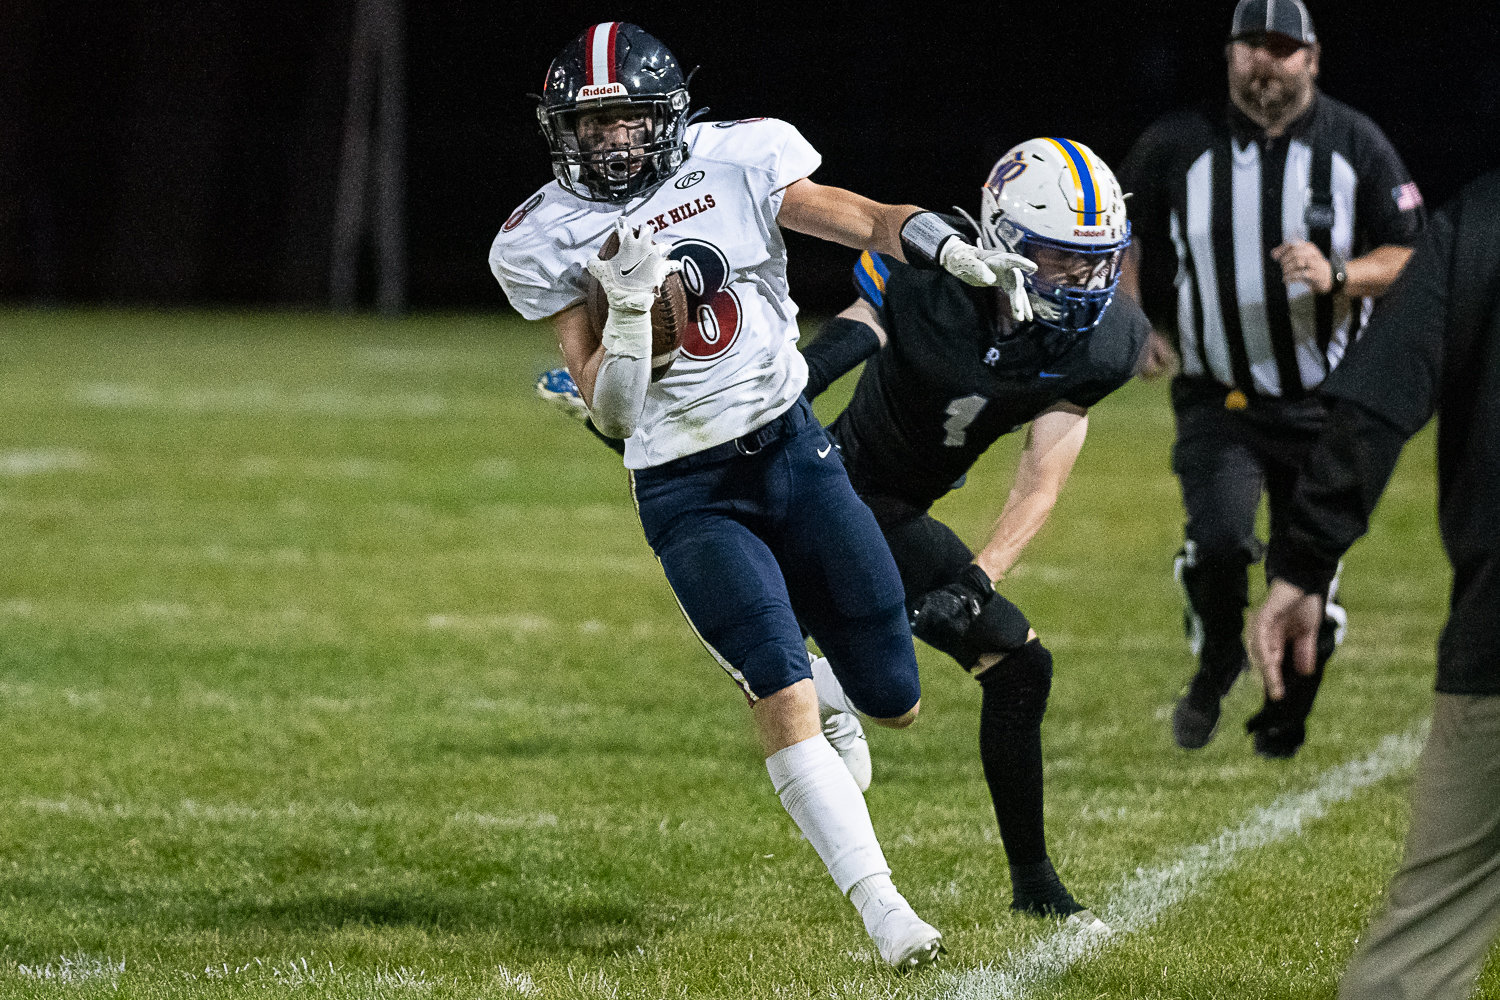 Black Hills' Braiden Bond tiptoes out of bounds in a 34-14 win over Rochester Sept. 16.